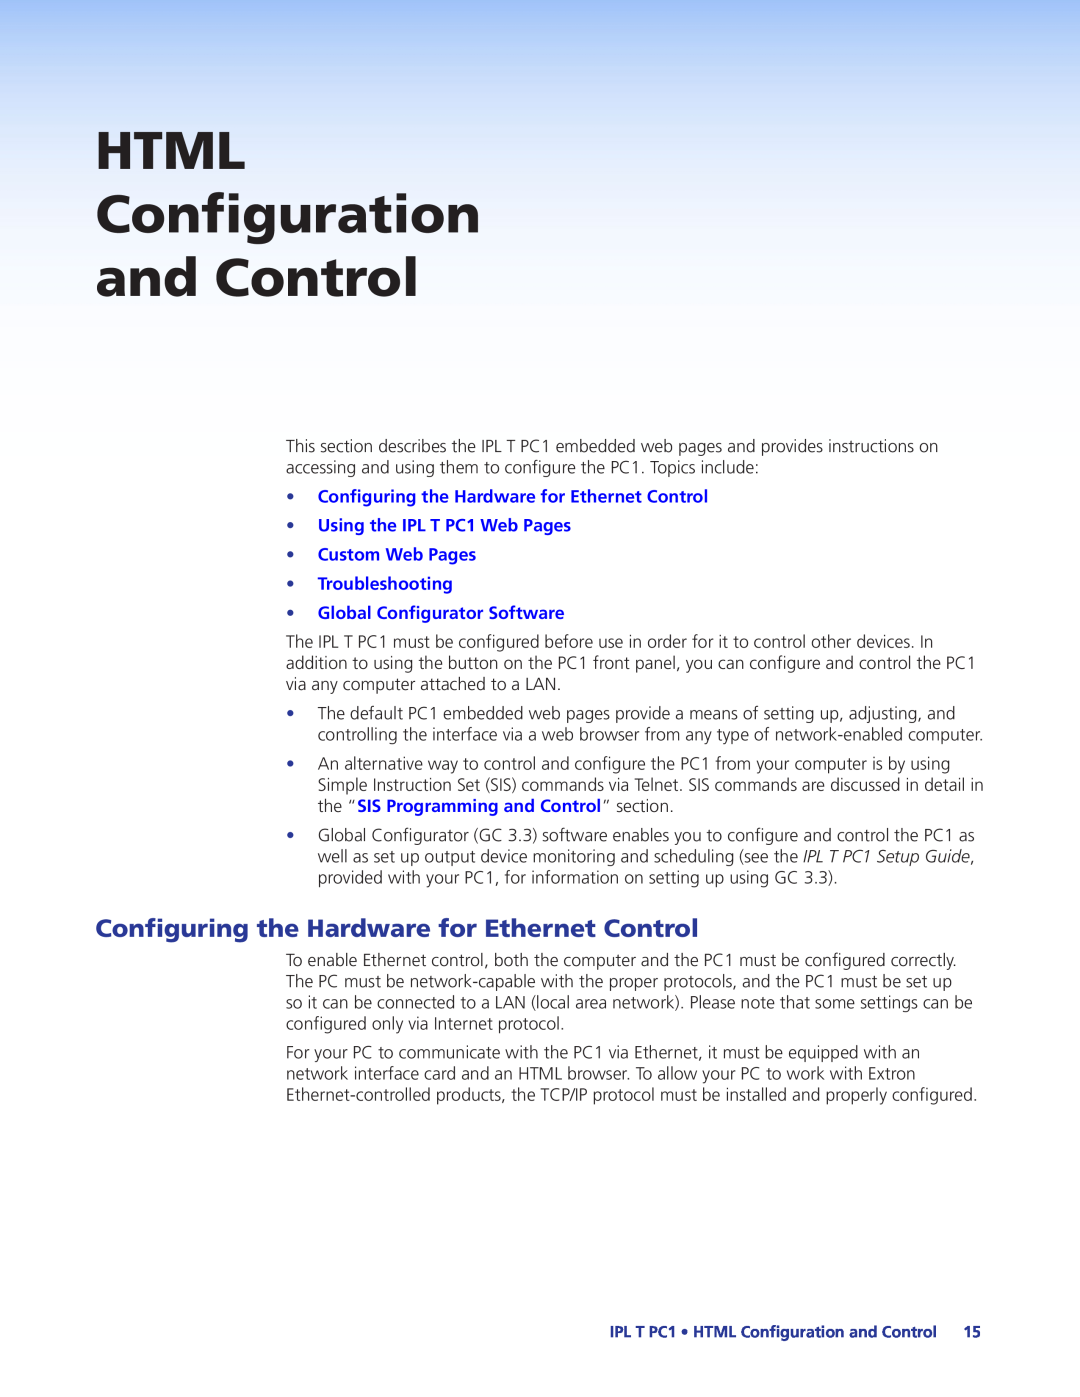 Extron electronic IPL T PC1i manual HTML Configuration and Control, Configuring the Hardware for Ethernet Control 